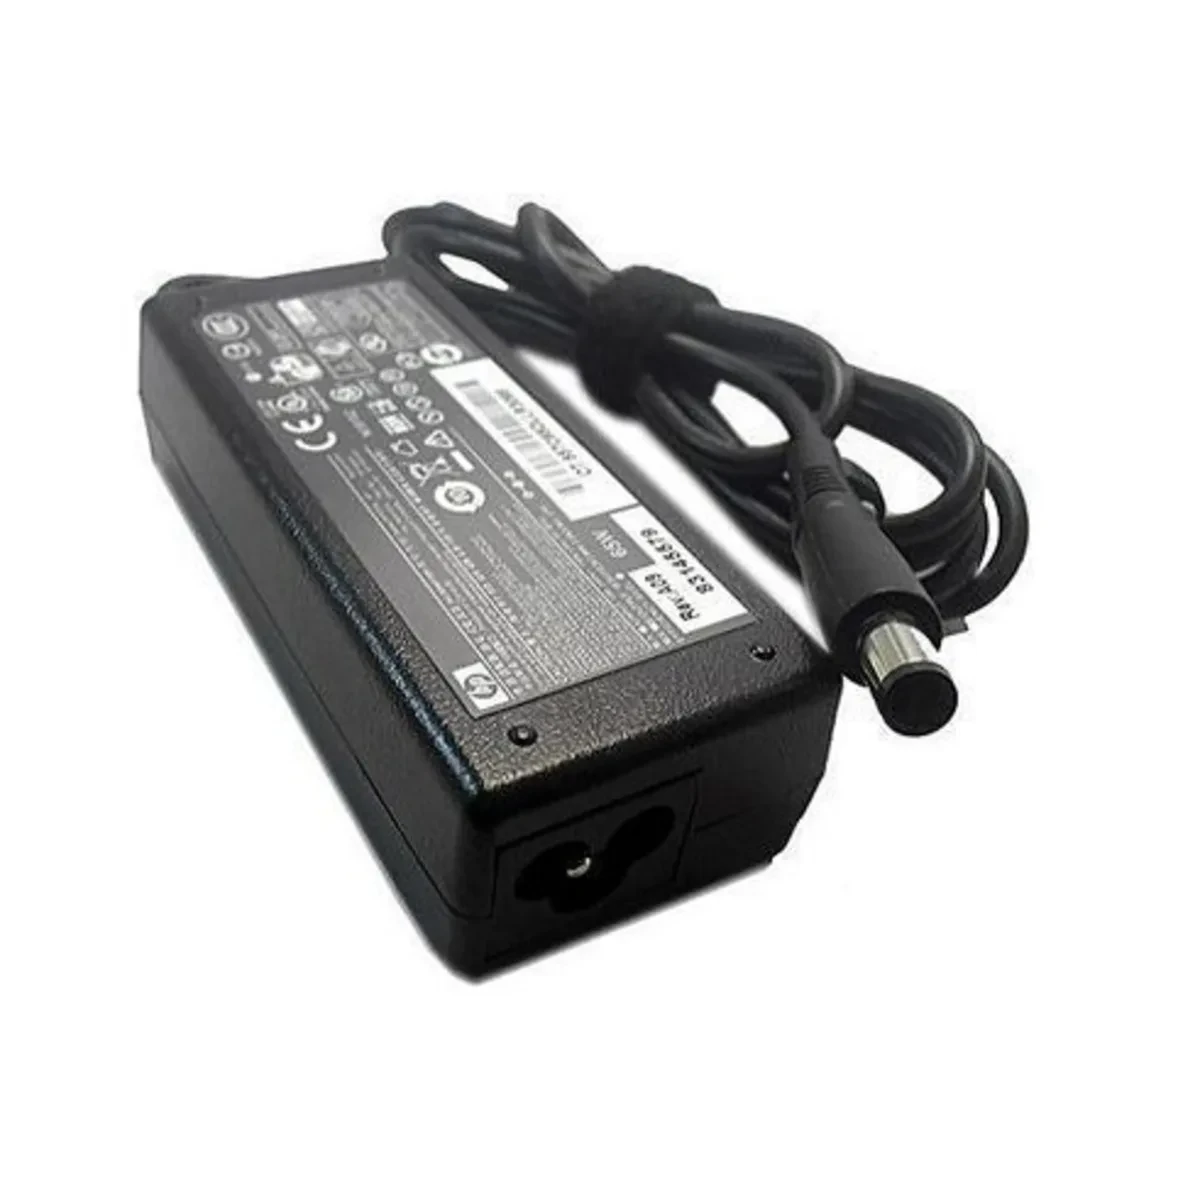 Hp Laptop Charger/ Adapter 18.5V-3.5A - Big Mouth Pin